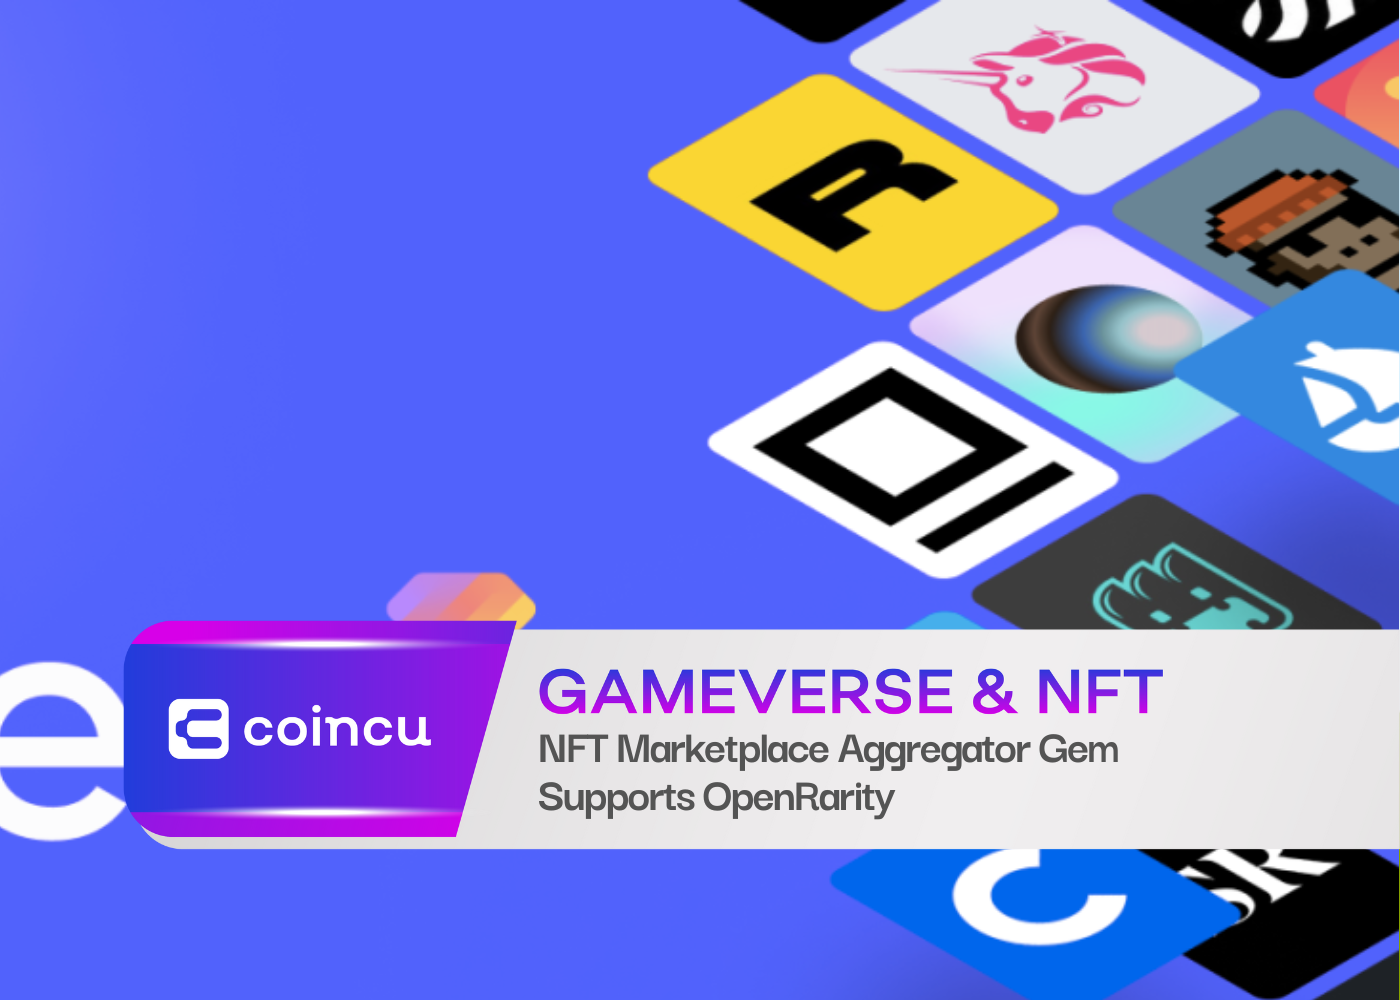 NFT Marketplace Aggregator Gem Supports OpenRarity